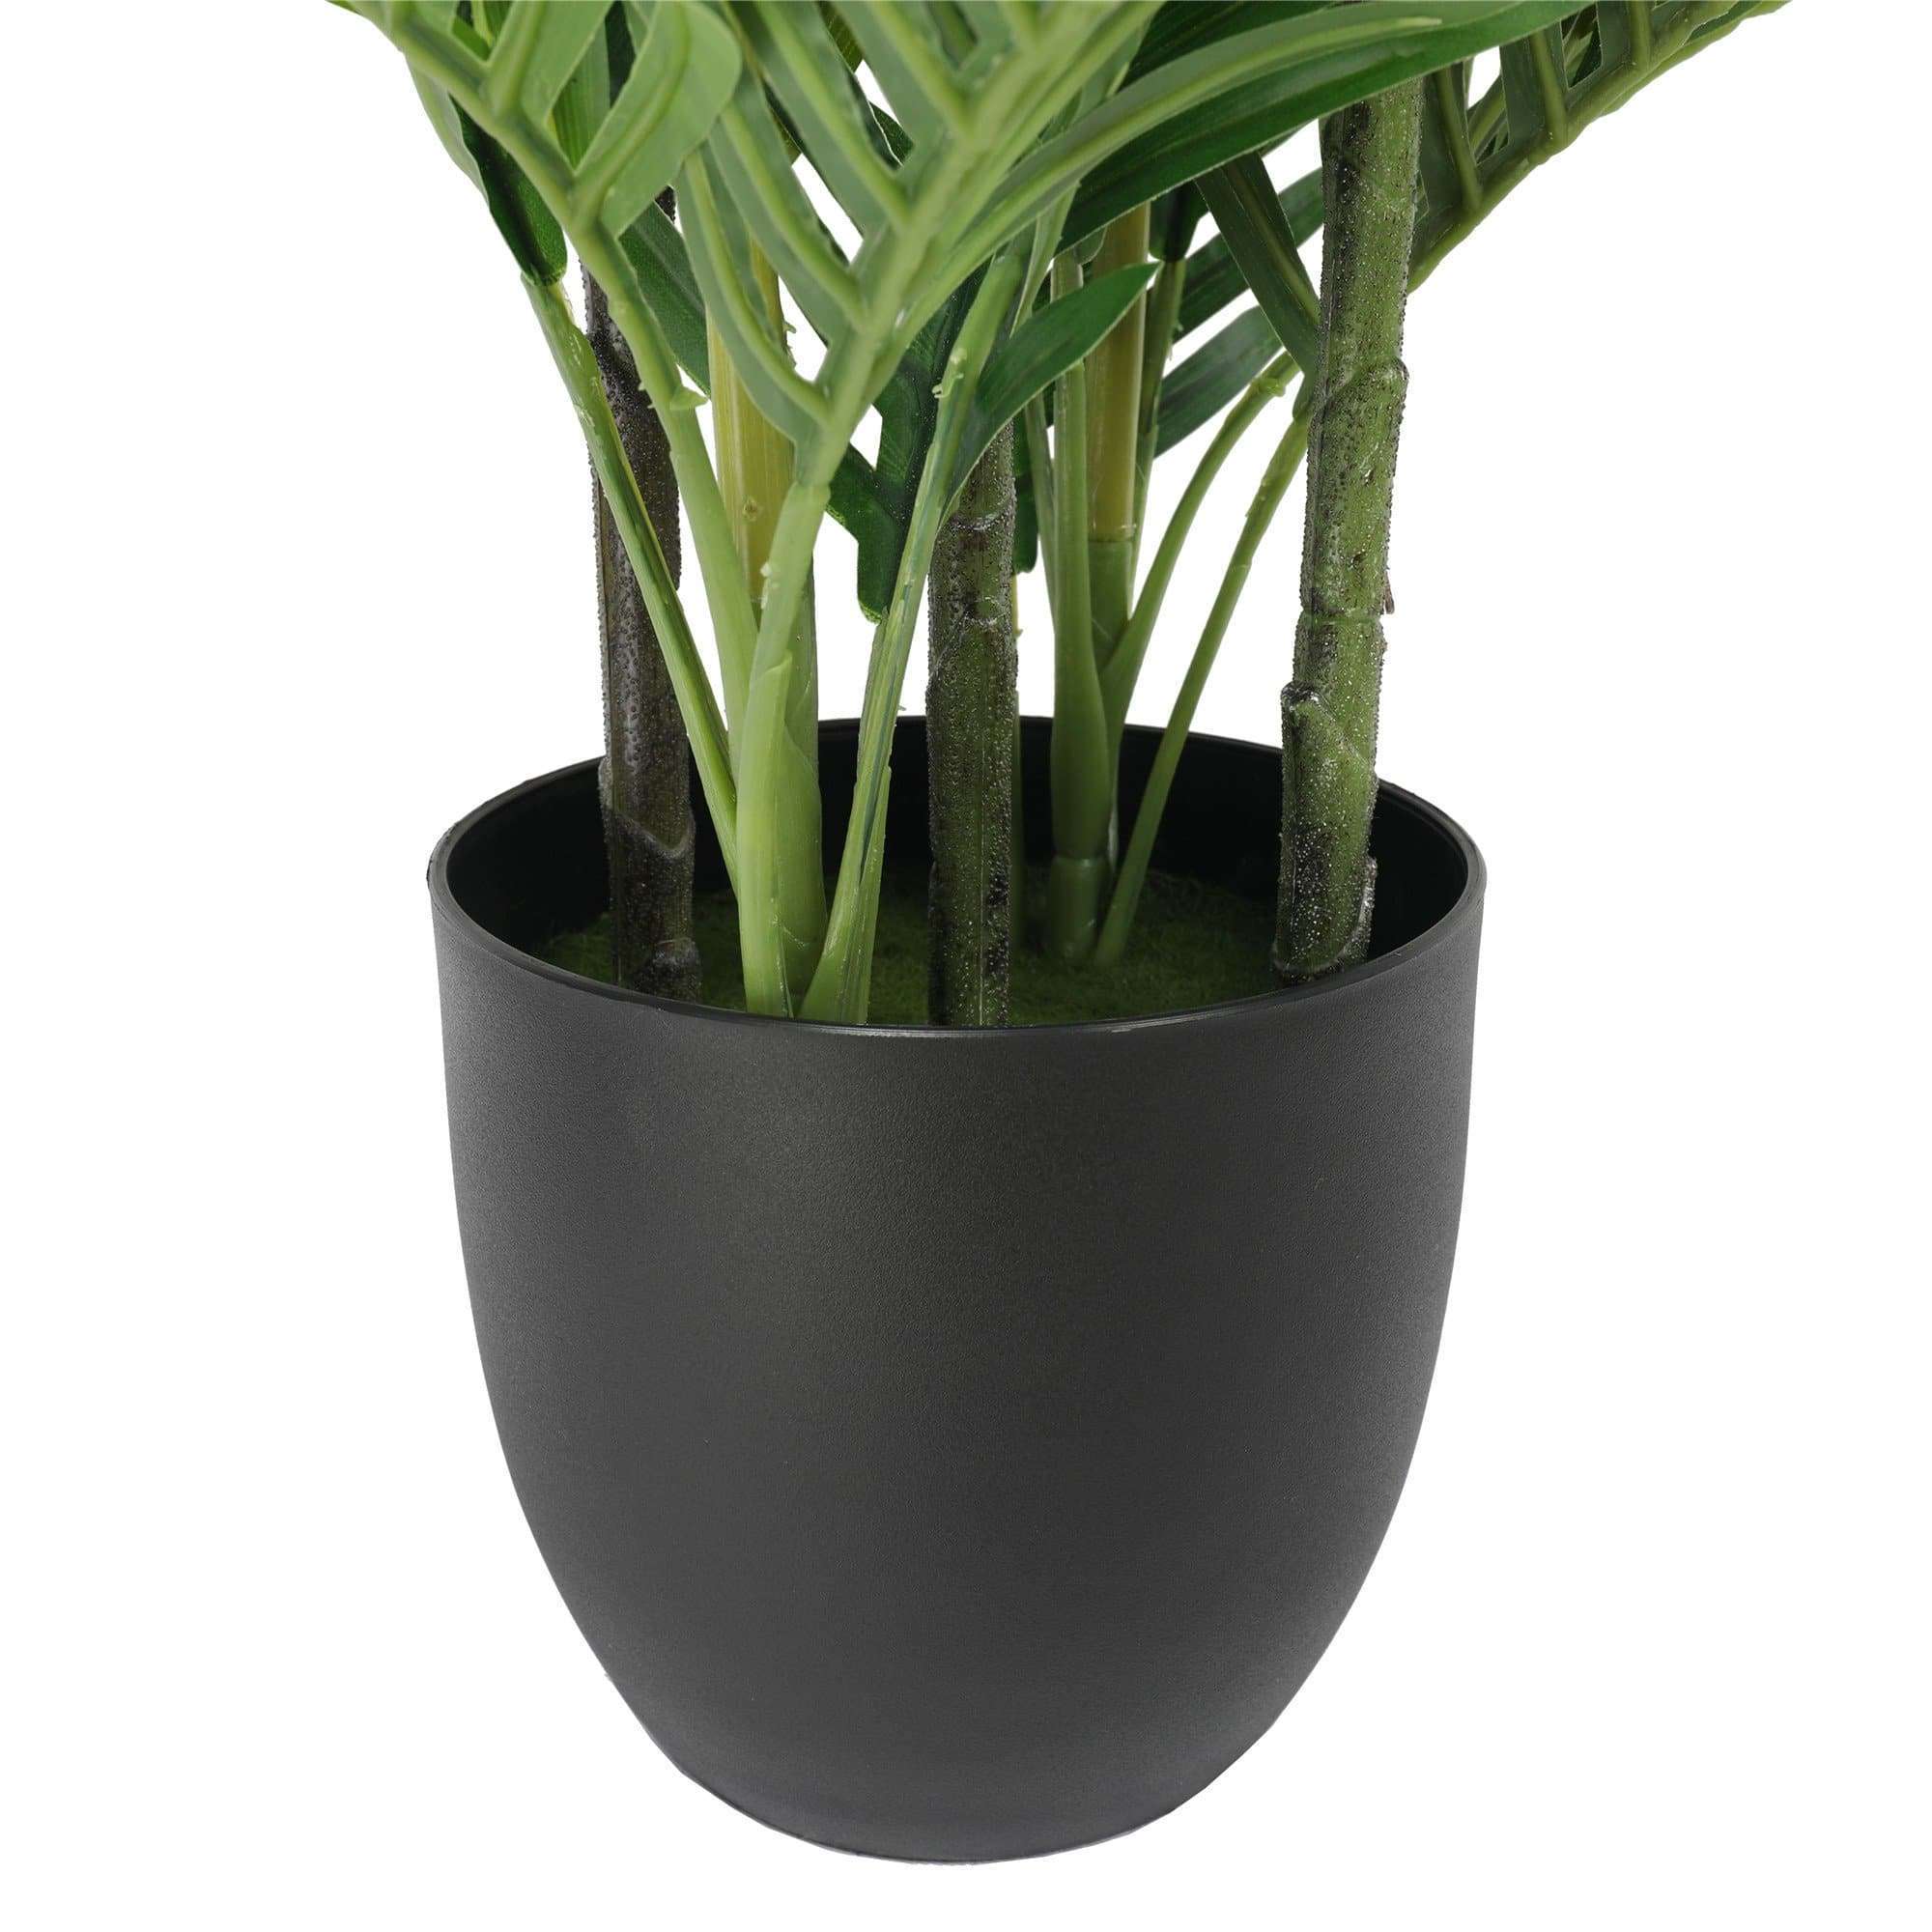 Potted Artificial Palm Multi-trunk Fan Palm 180cm - Designer Vertical Gardens Bamboos and Palm